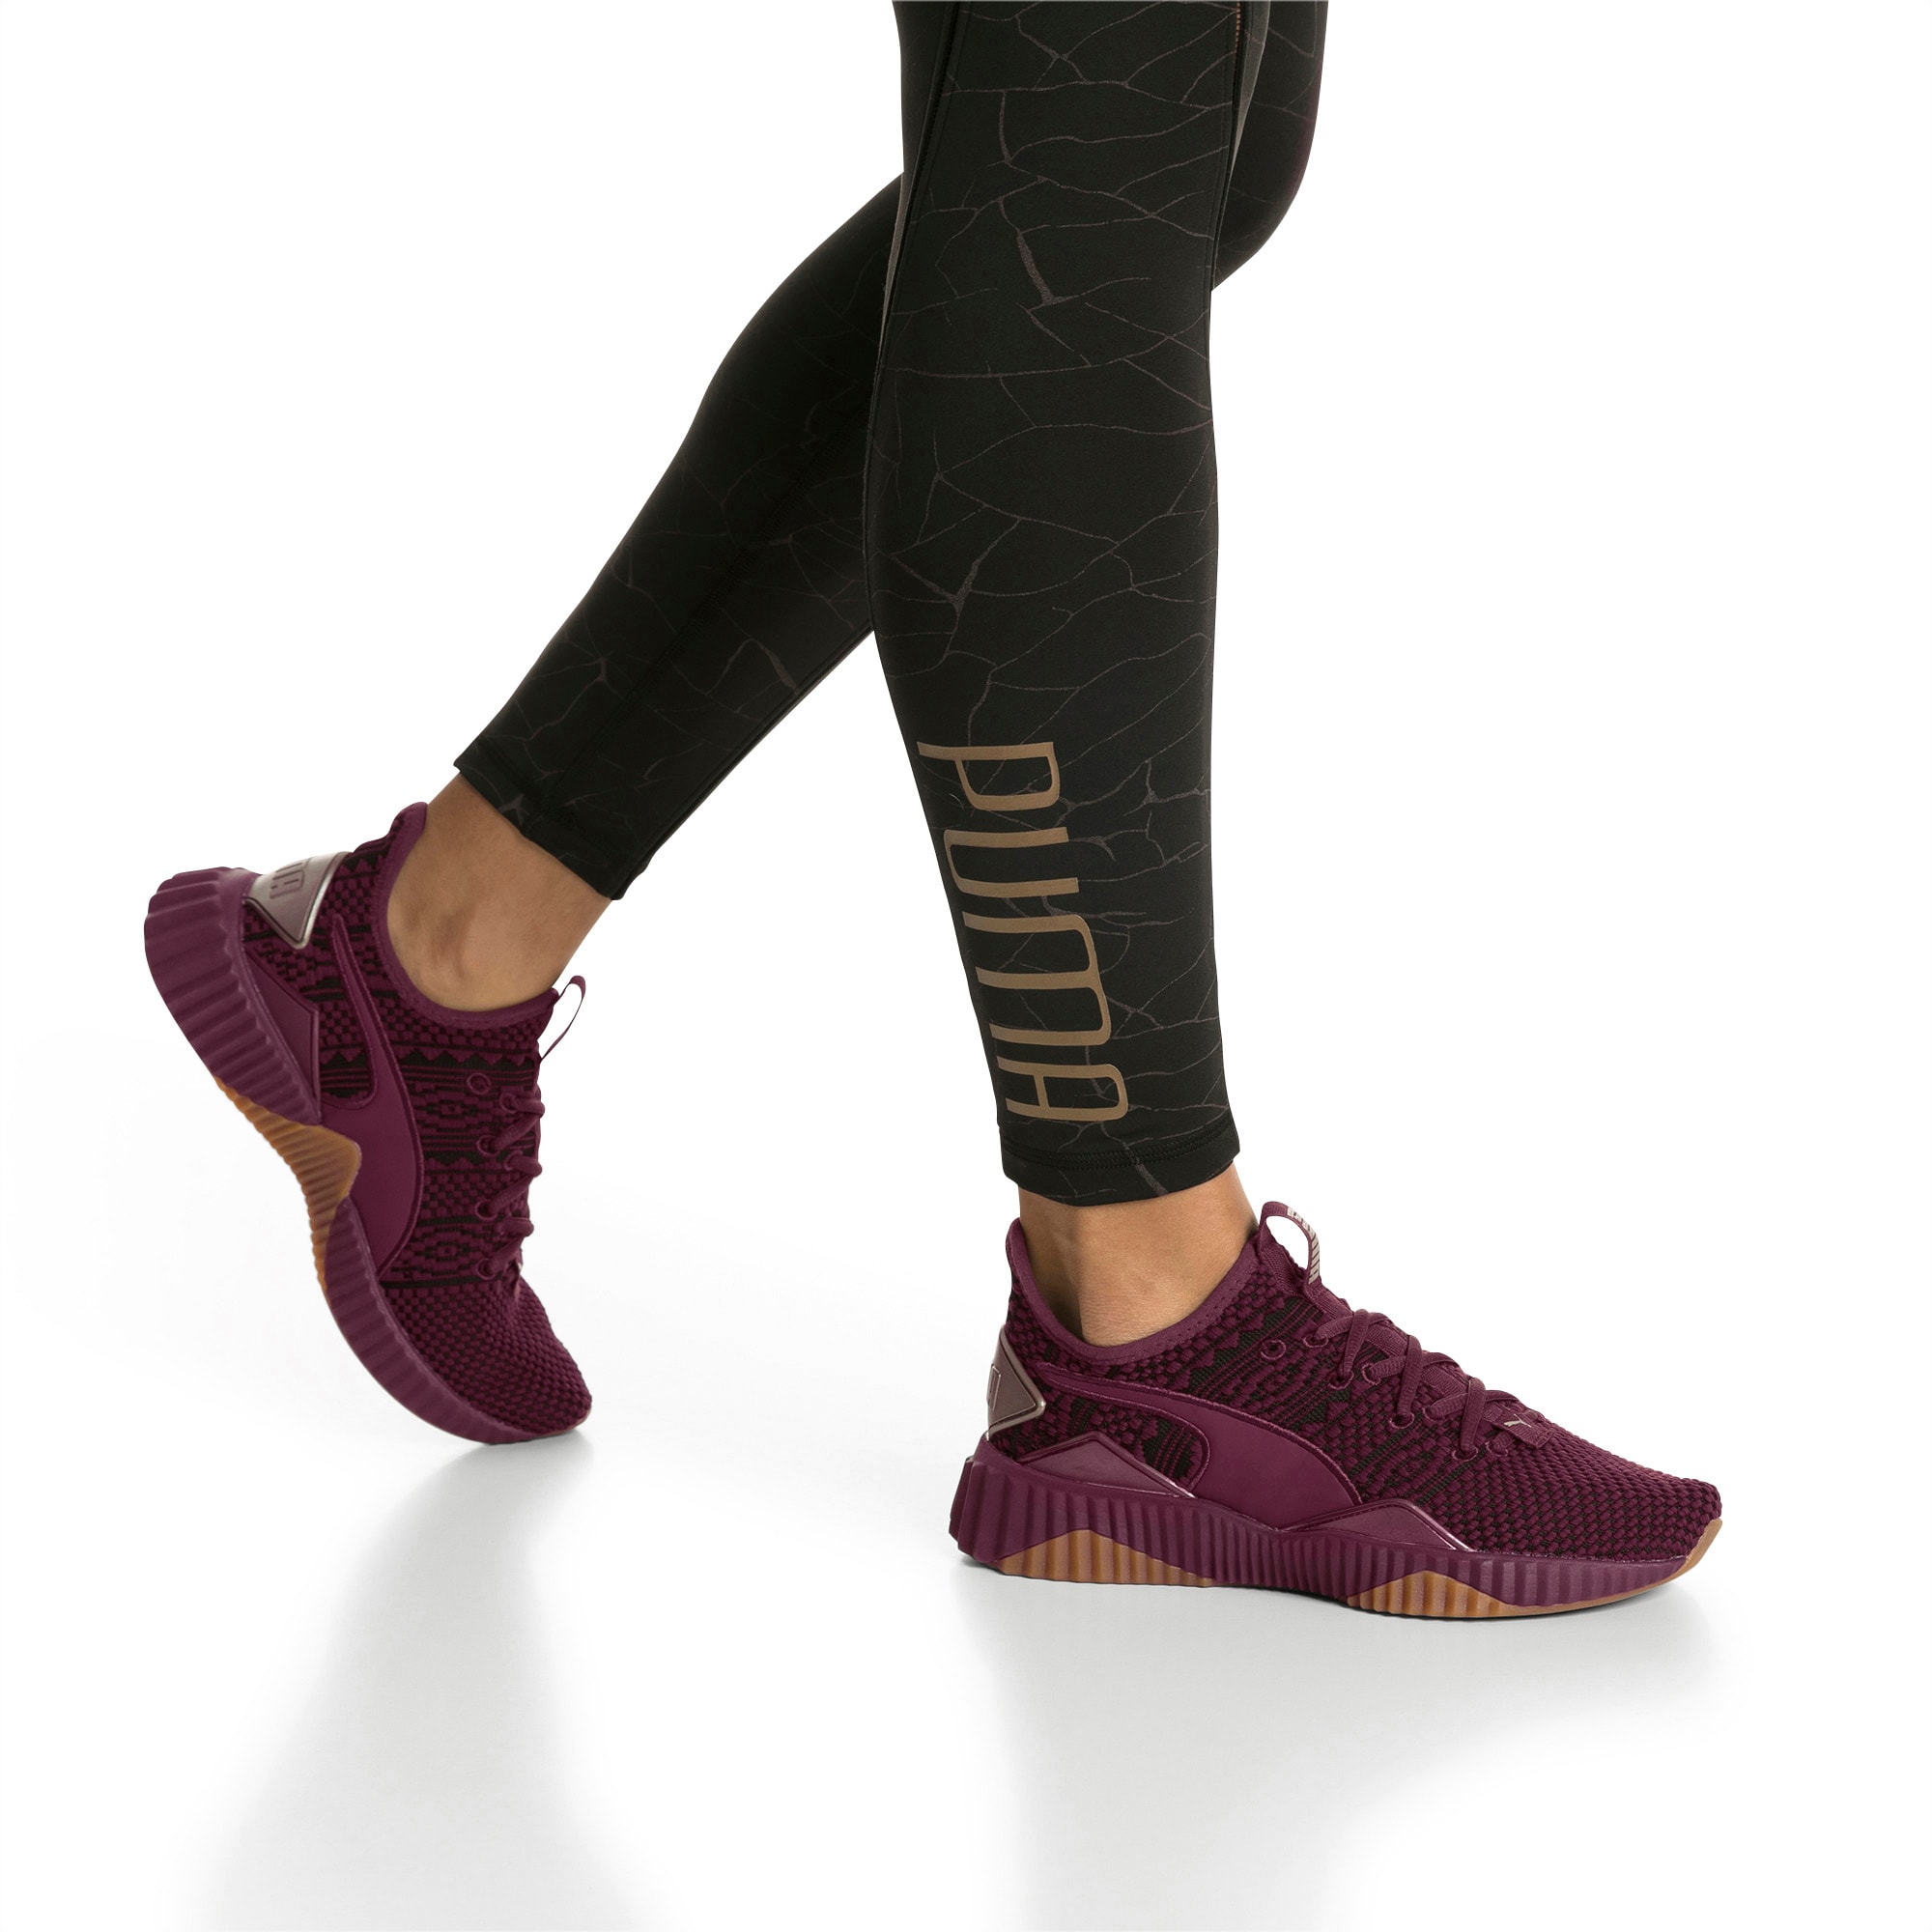 Defy Luxe Women's Training Shoes | PUMA US